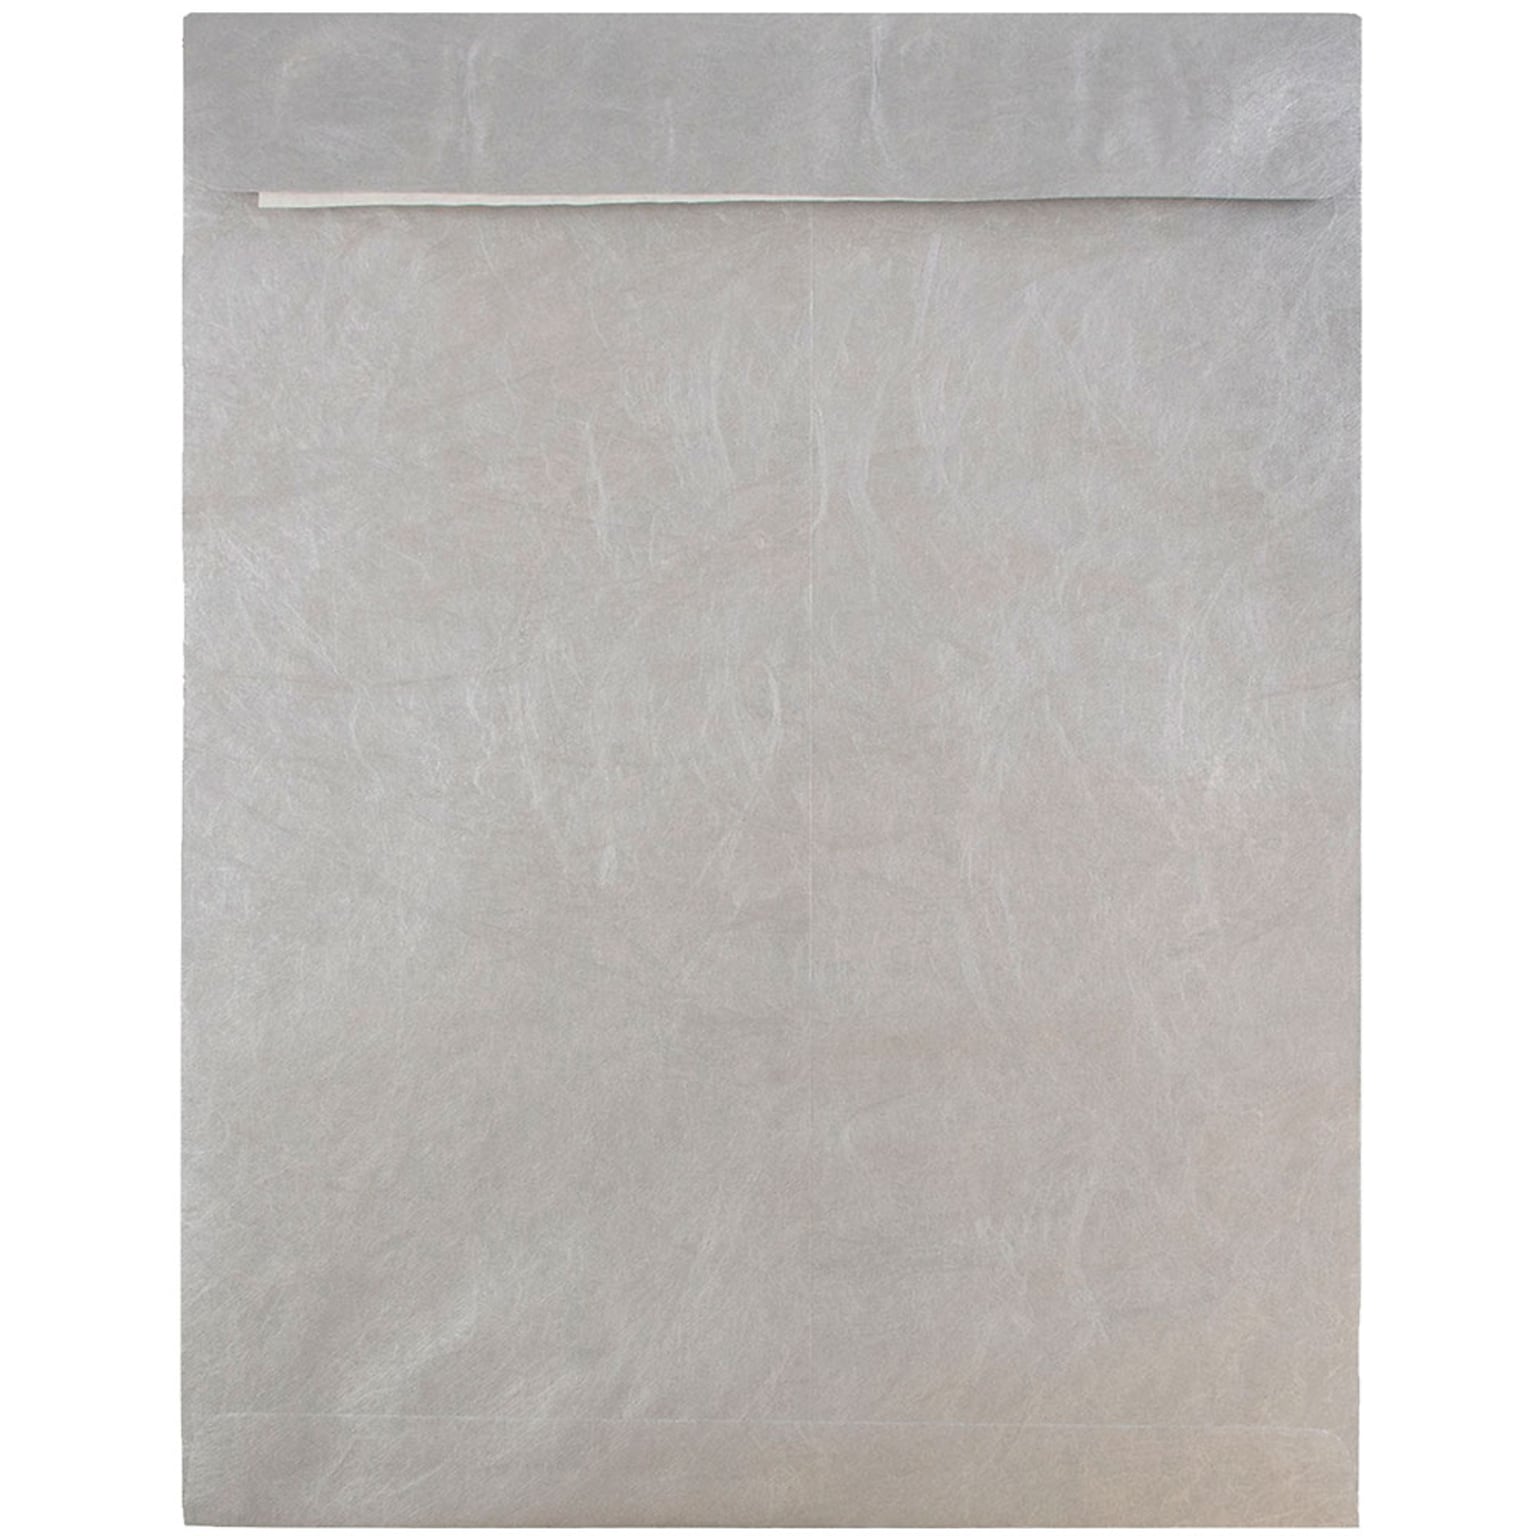 JAM Paper Open End #13 Catalog Envelope, with Peel & Seal Closure 10 x 13, Silver, 25/Pack (V021384)